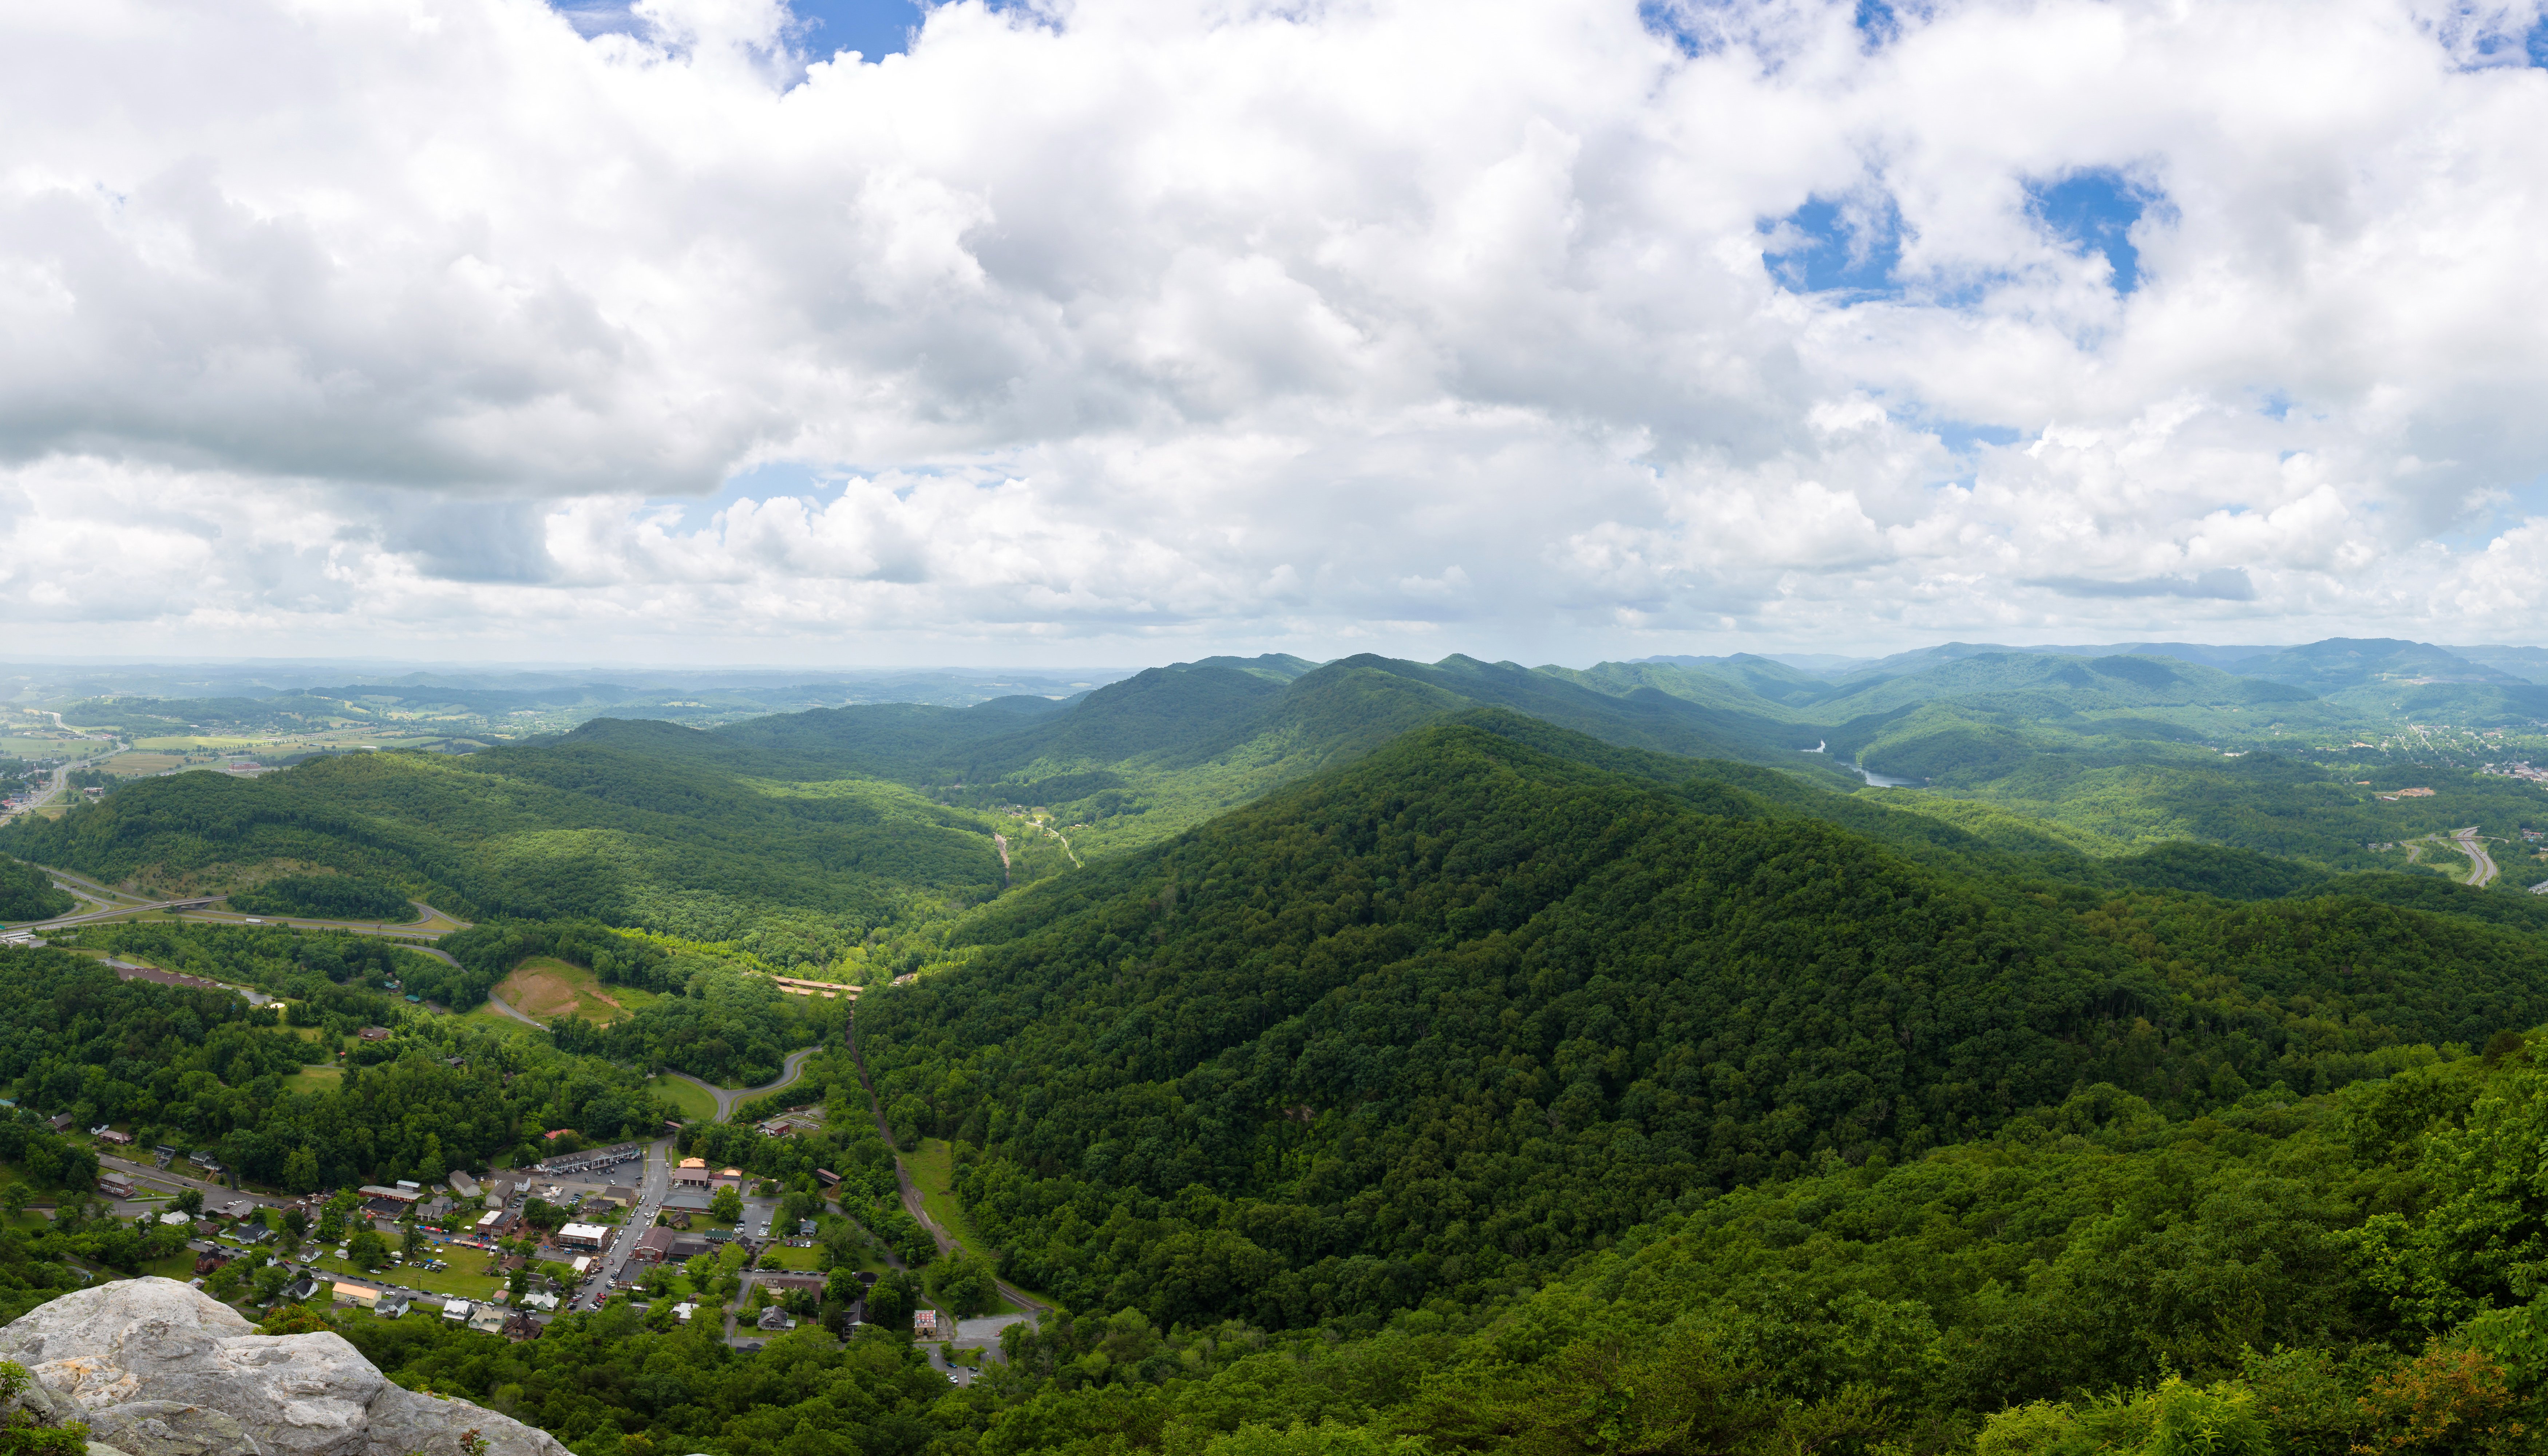 usa, Mountains, Forests, Clouds, Lee, Virginia, Nature Wallpaper